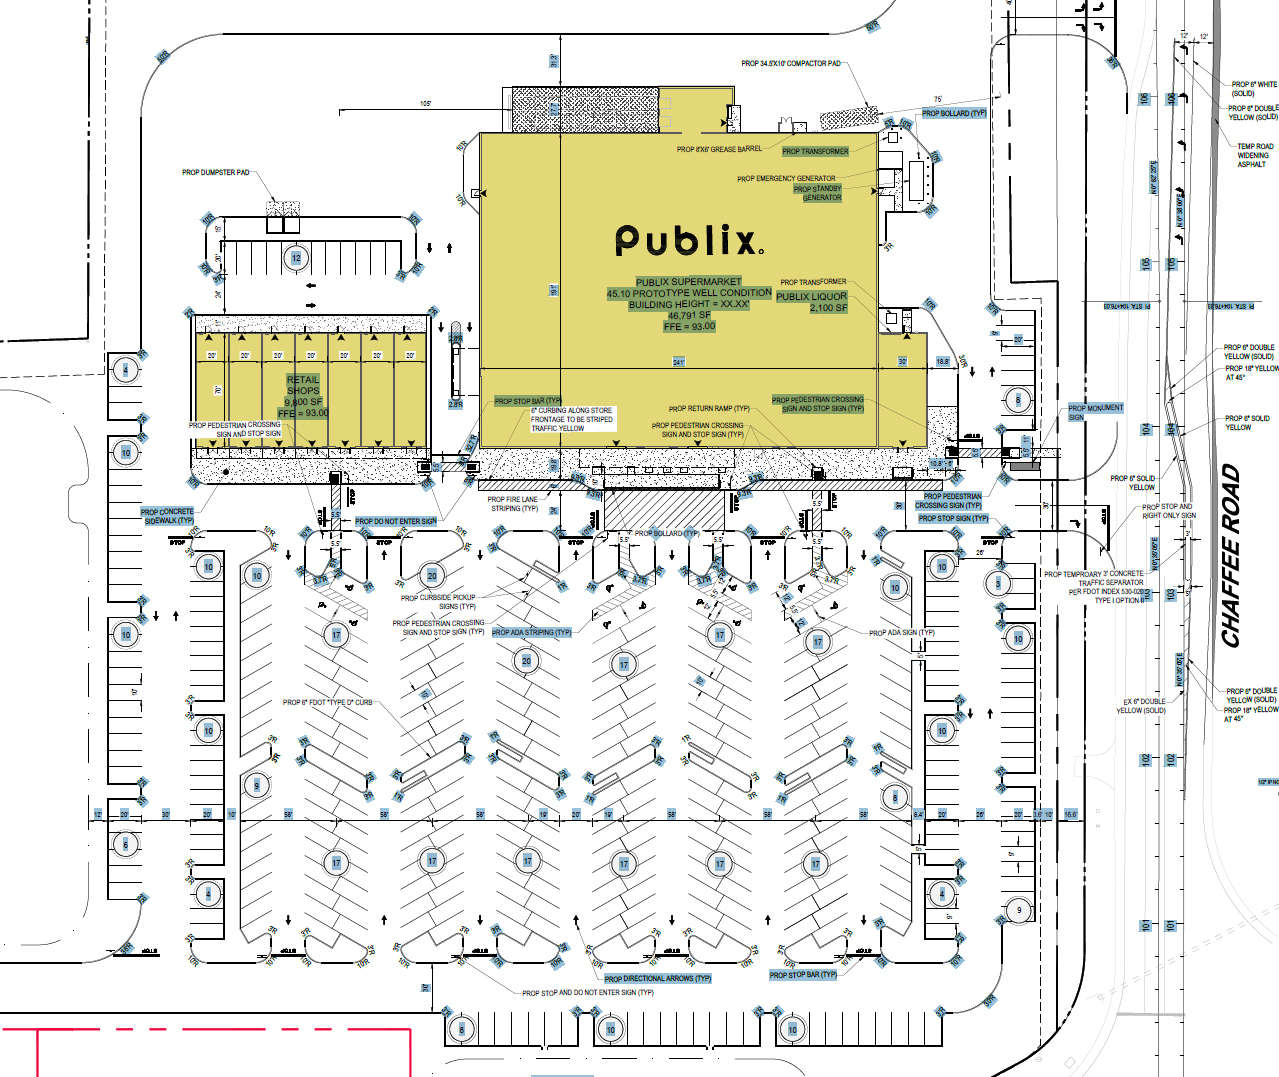 The city is reviewing an application for the 19.35-acre project designed for a 46,791-square-foot Publix and another 9,800-square-foot building of retail shops.